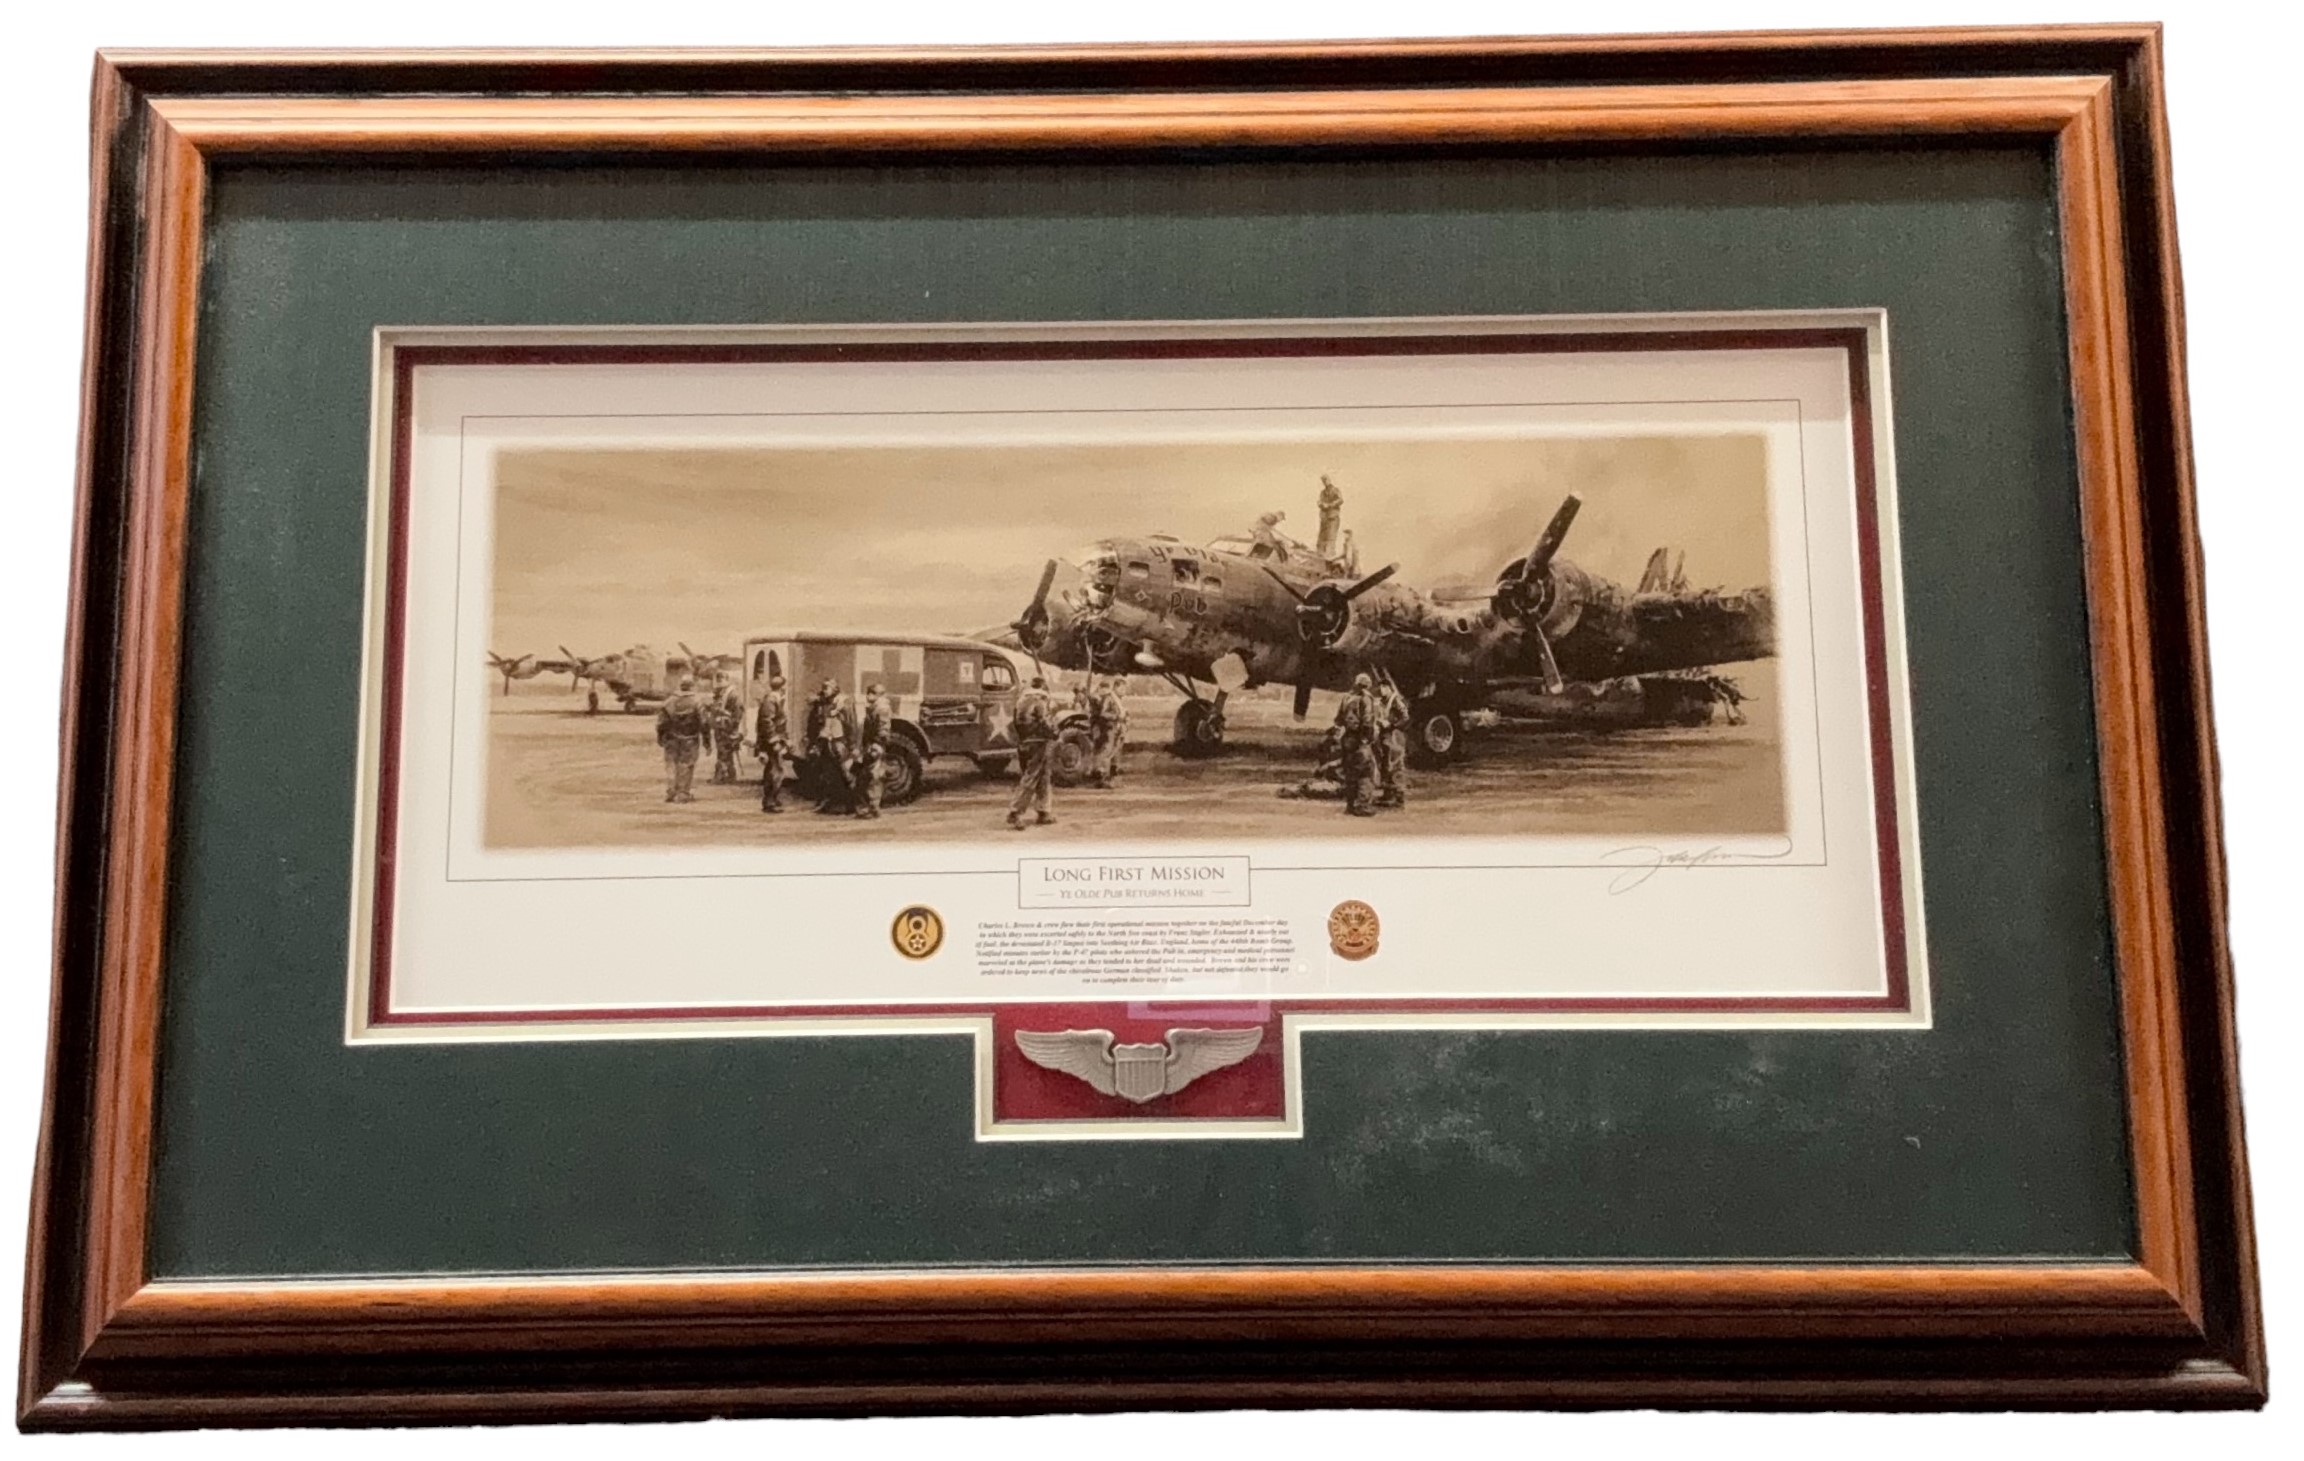 WW2 Print titled Long First Mission - Ye Olde Pub Returns Home signed by artist JOHN SHAW . This